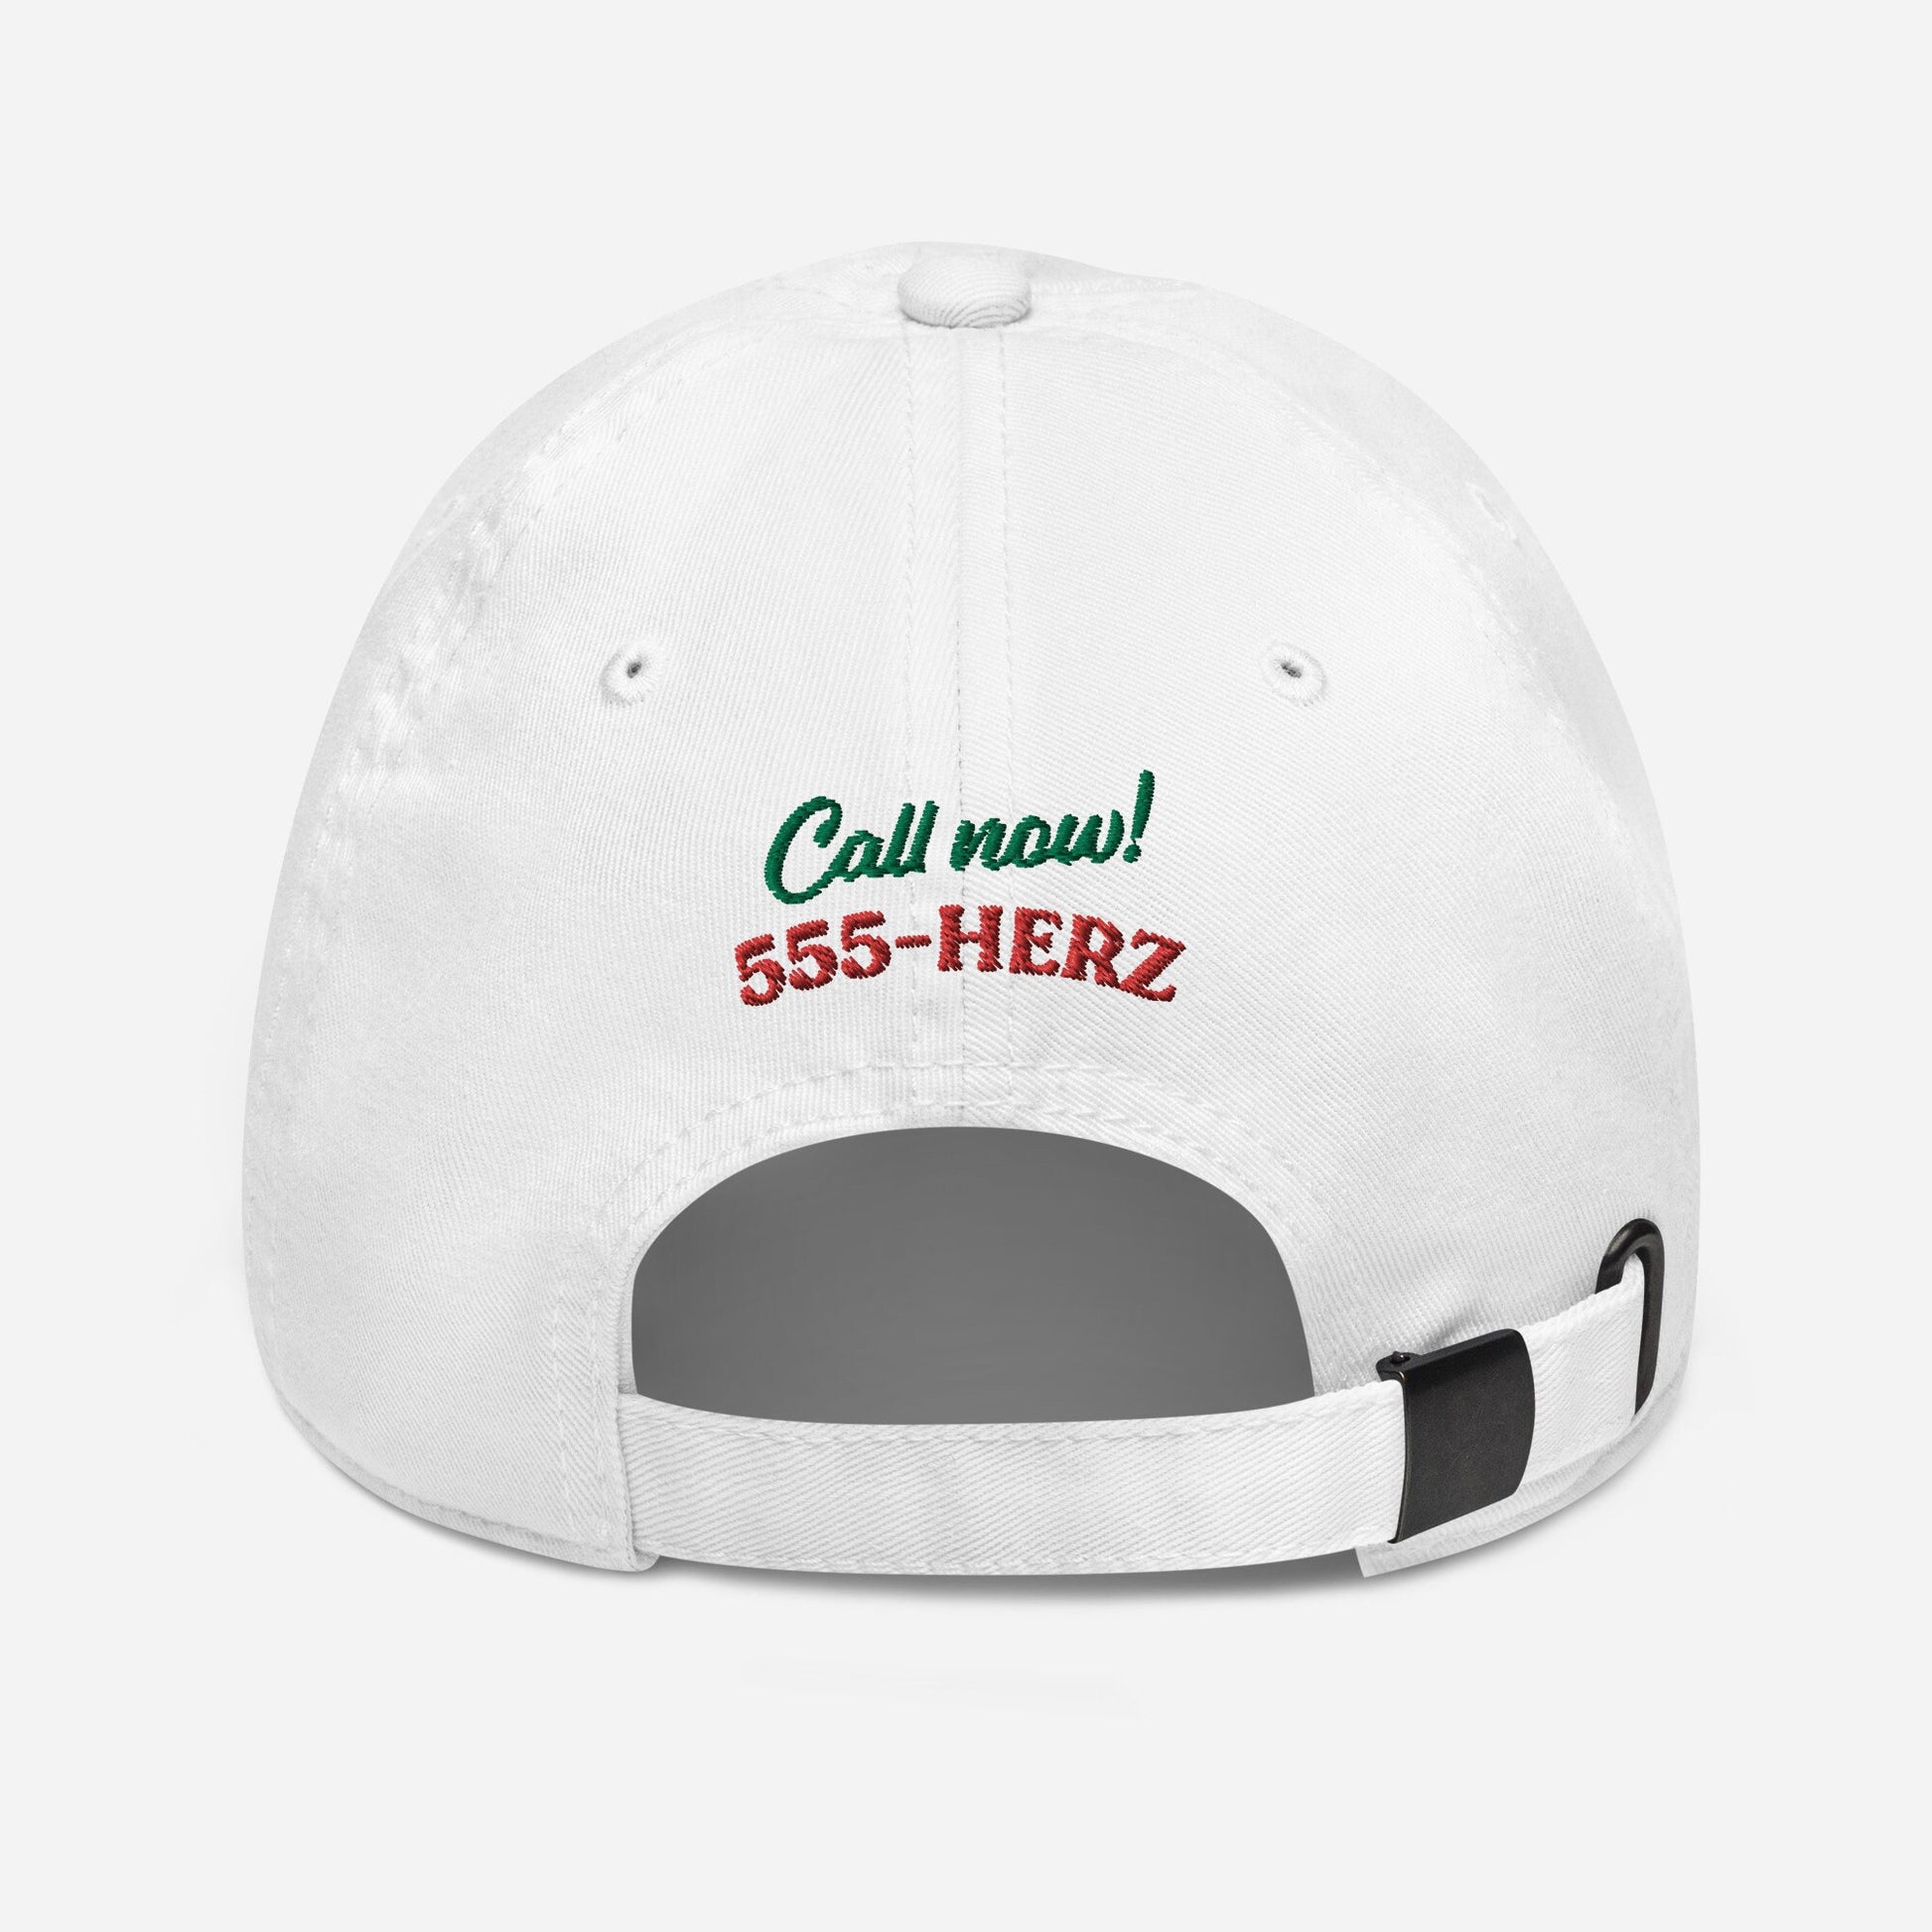 Herzlich Pizza Delivery Head Attire for Low-key Brand Appreciation and Exotic Modular-inspired Roleplay